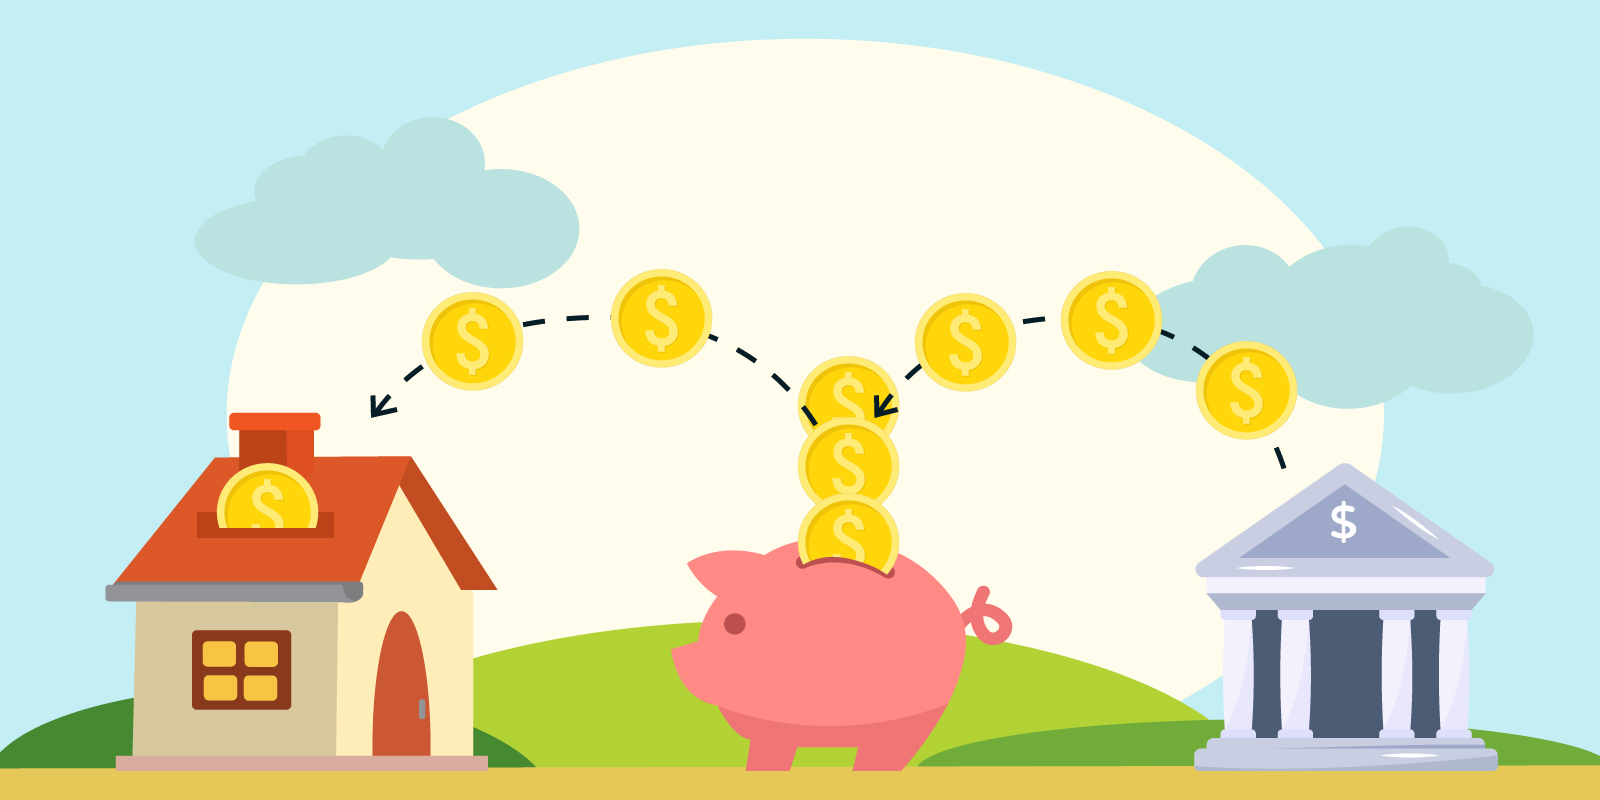 Infographic of a piggy bank and trying to refinance their home